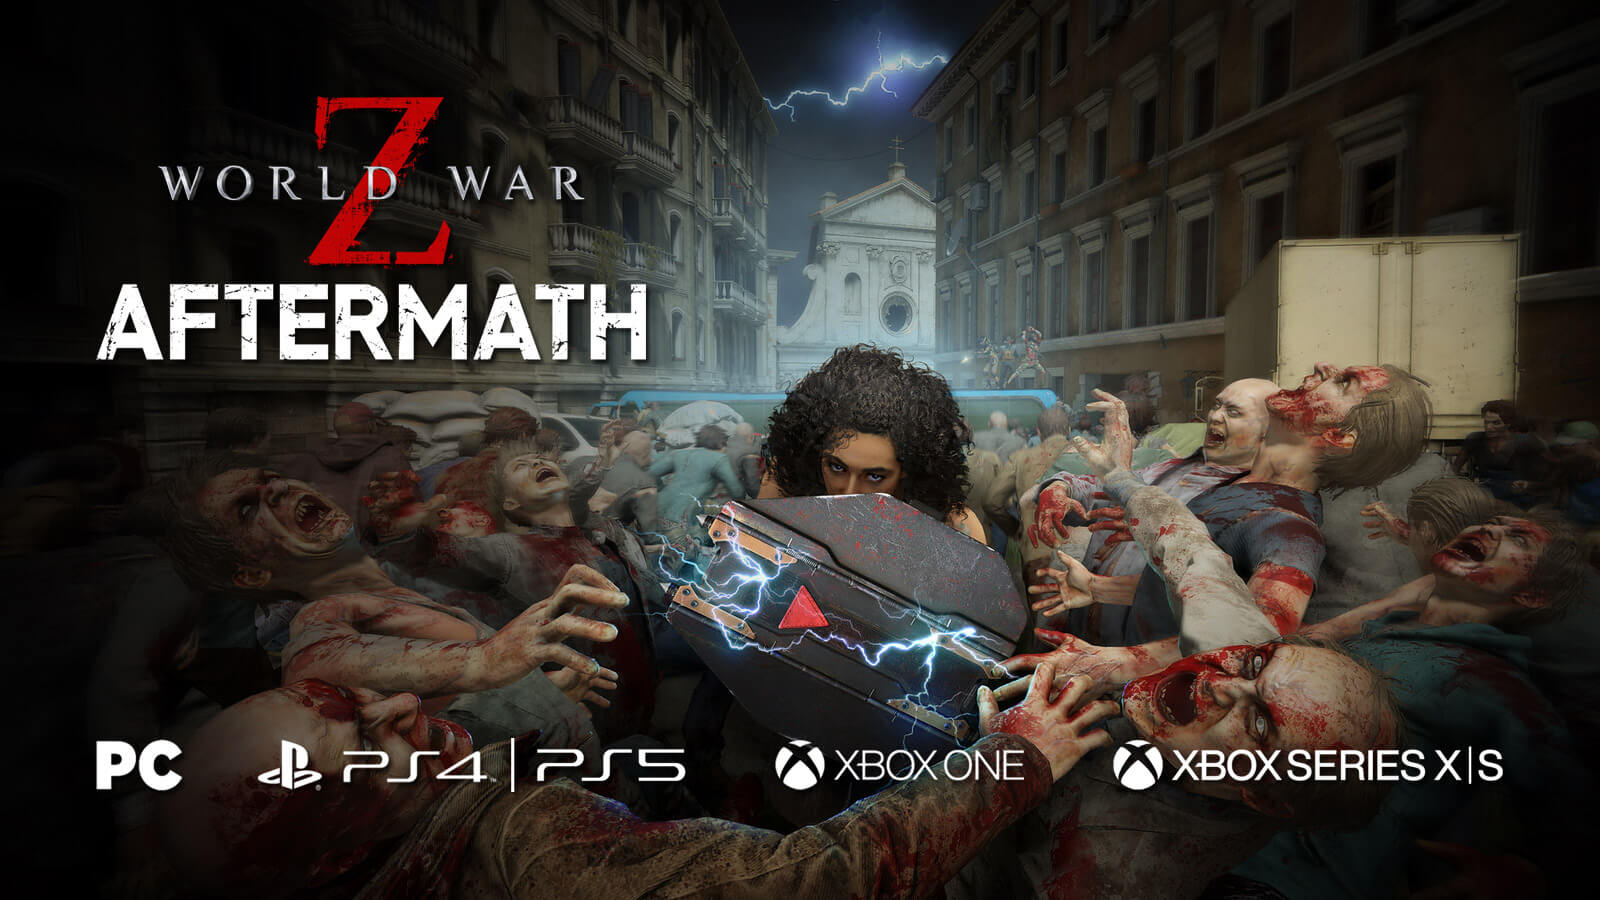 World War Z Aftermath Expanded Edition Announced